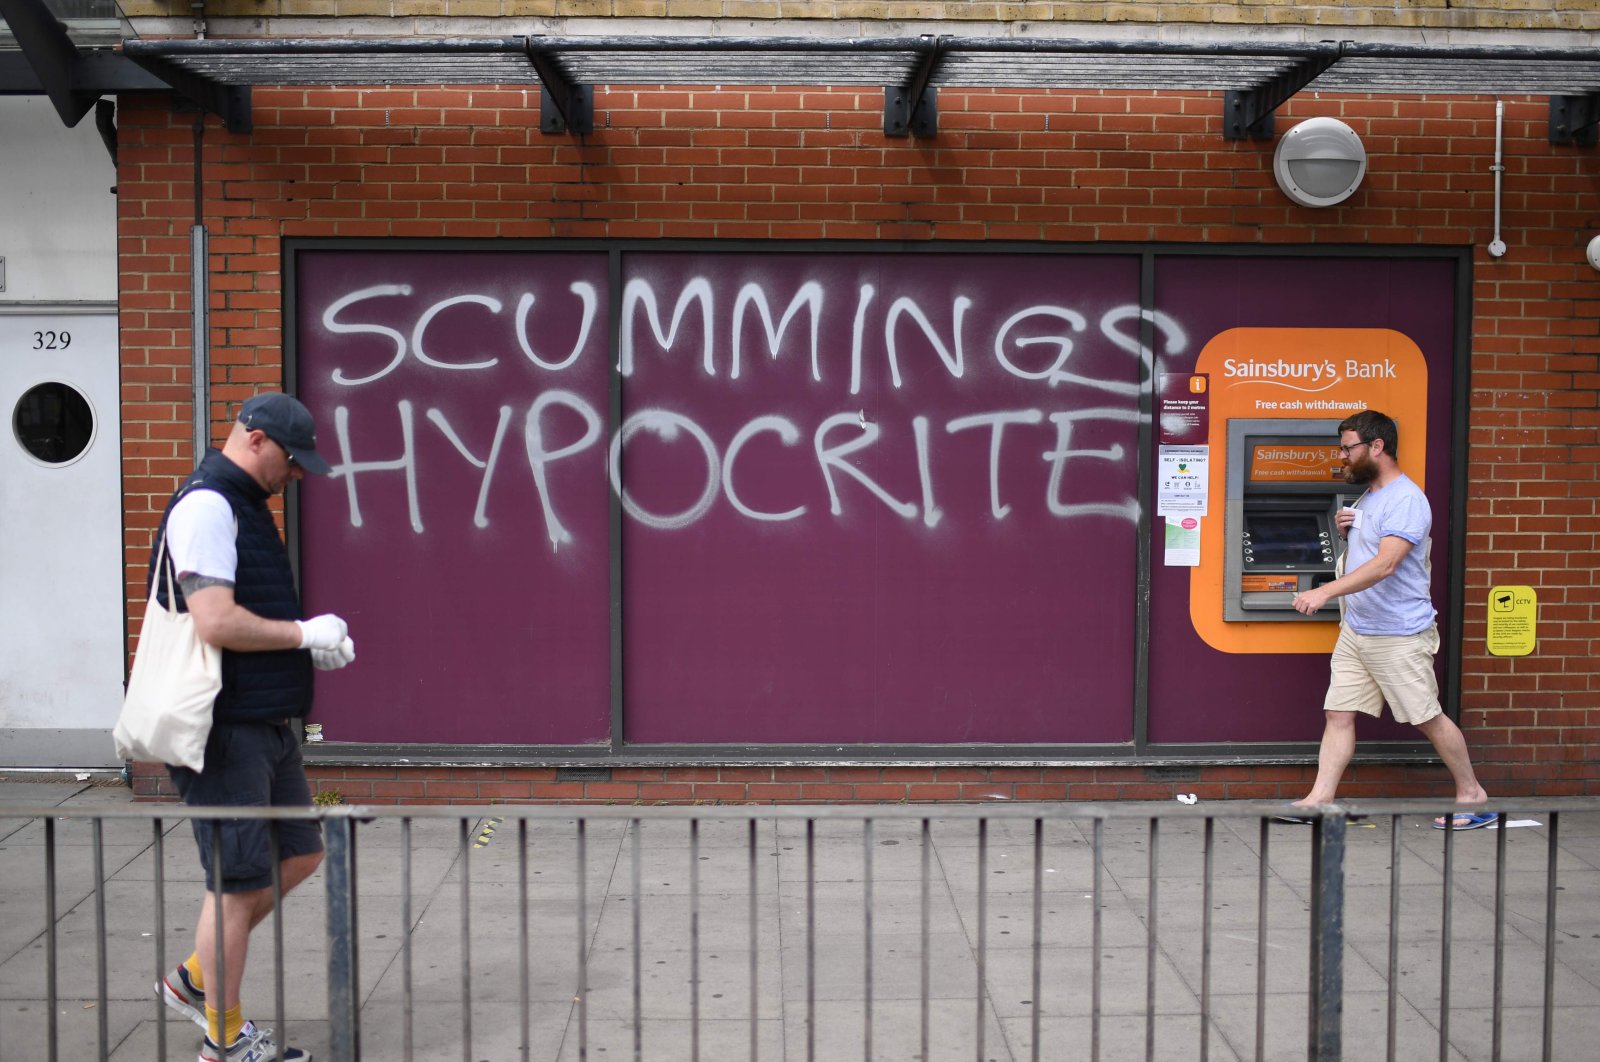 People walk past graffiti deriding number 10 special advisor Dominic Cummings outside a supermarket near his residence in north London on May 26, 2020 (AFP Photo)